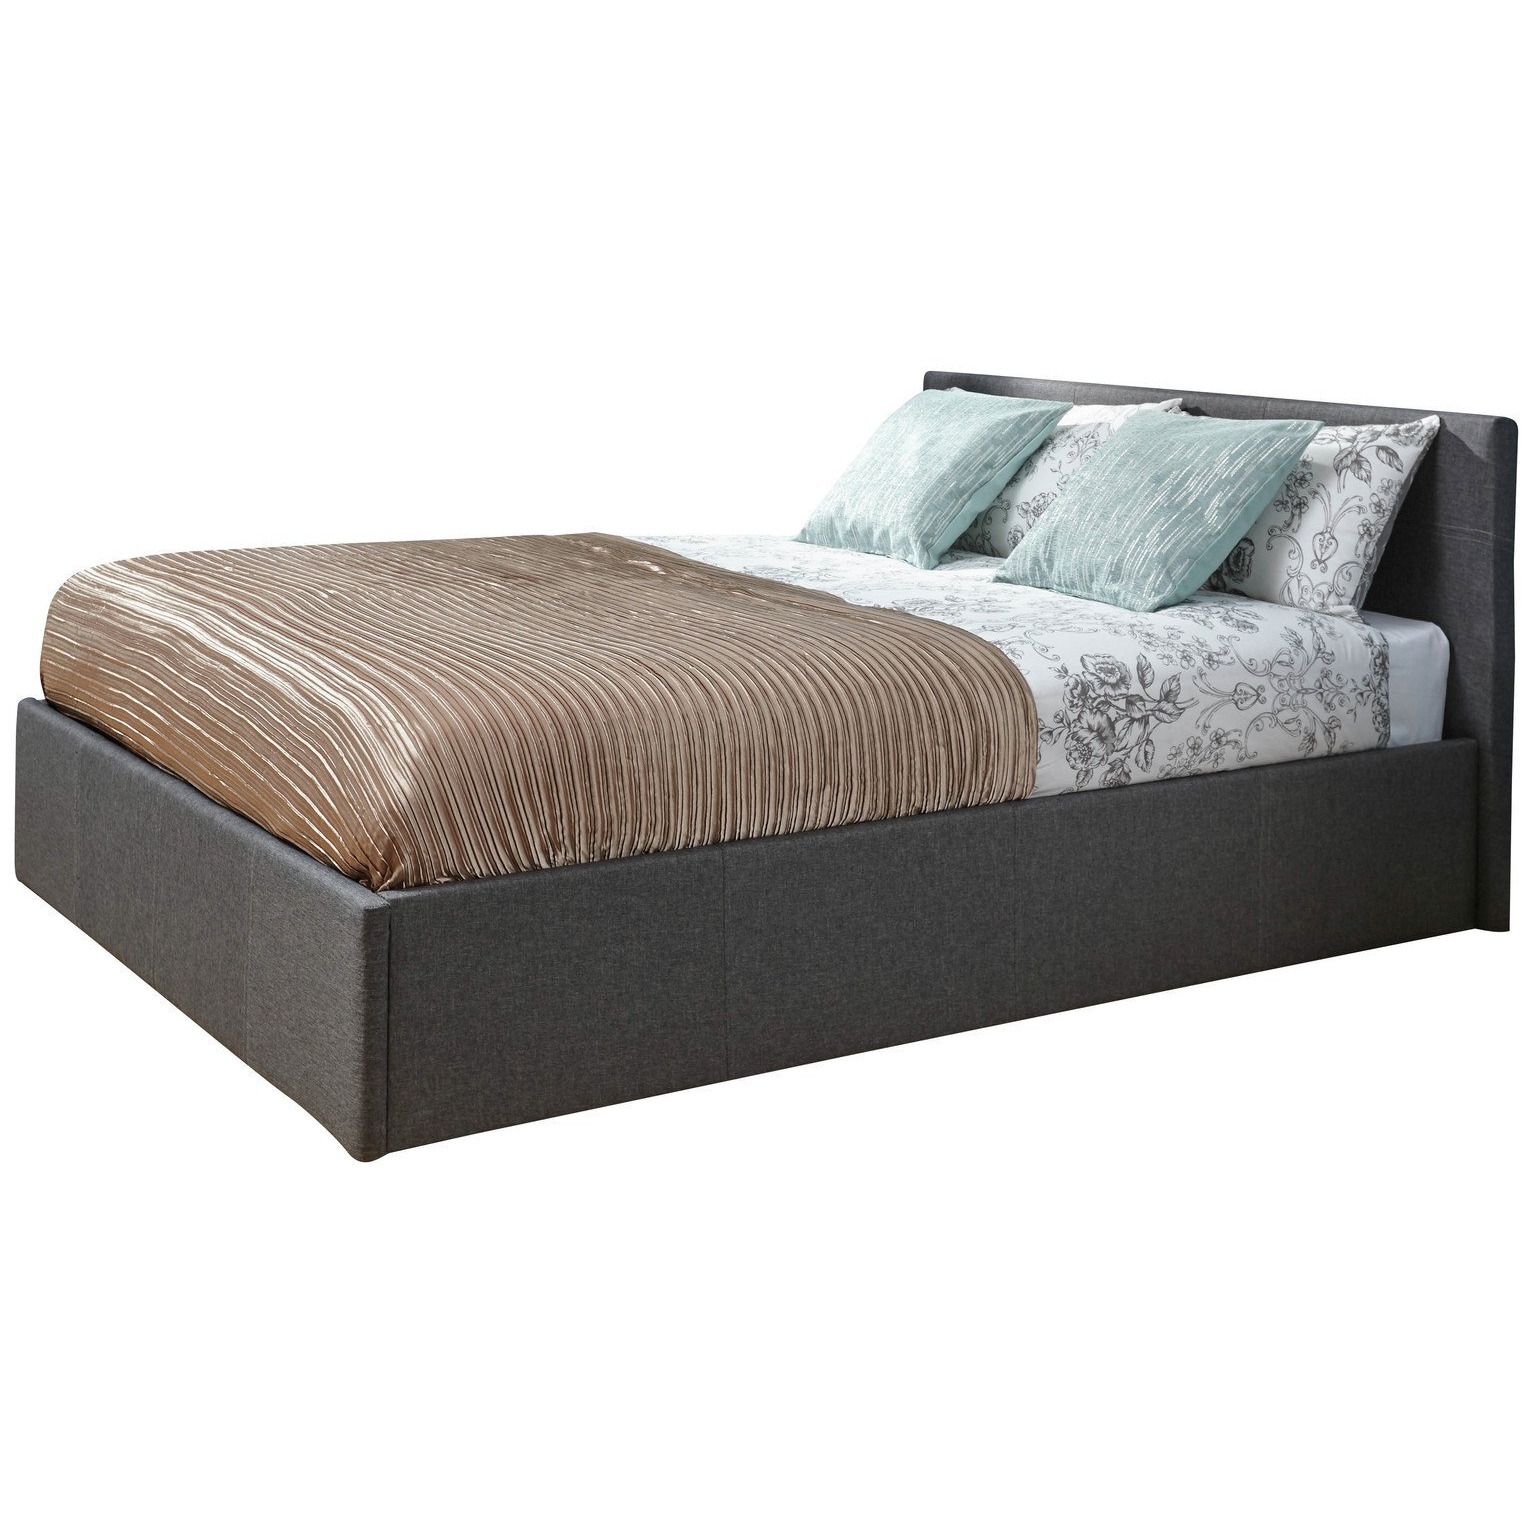 GFW Small Double End Lift Ottoman Fabric Bed Frame - Grey - image 1